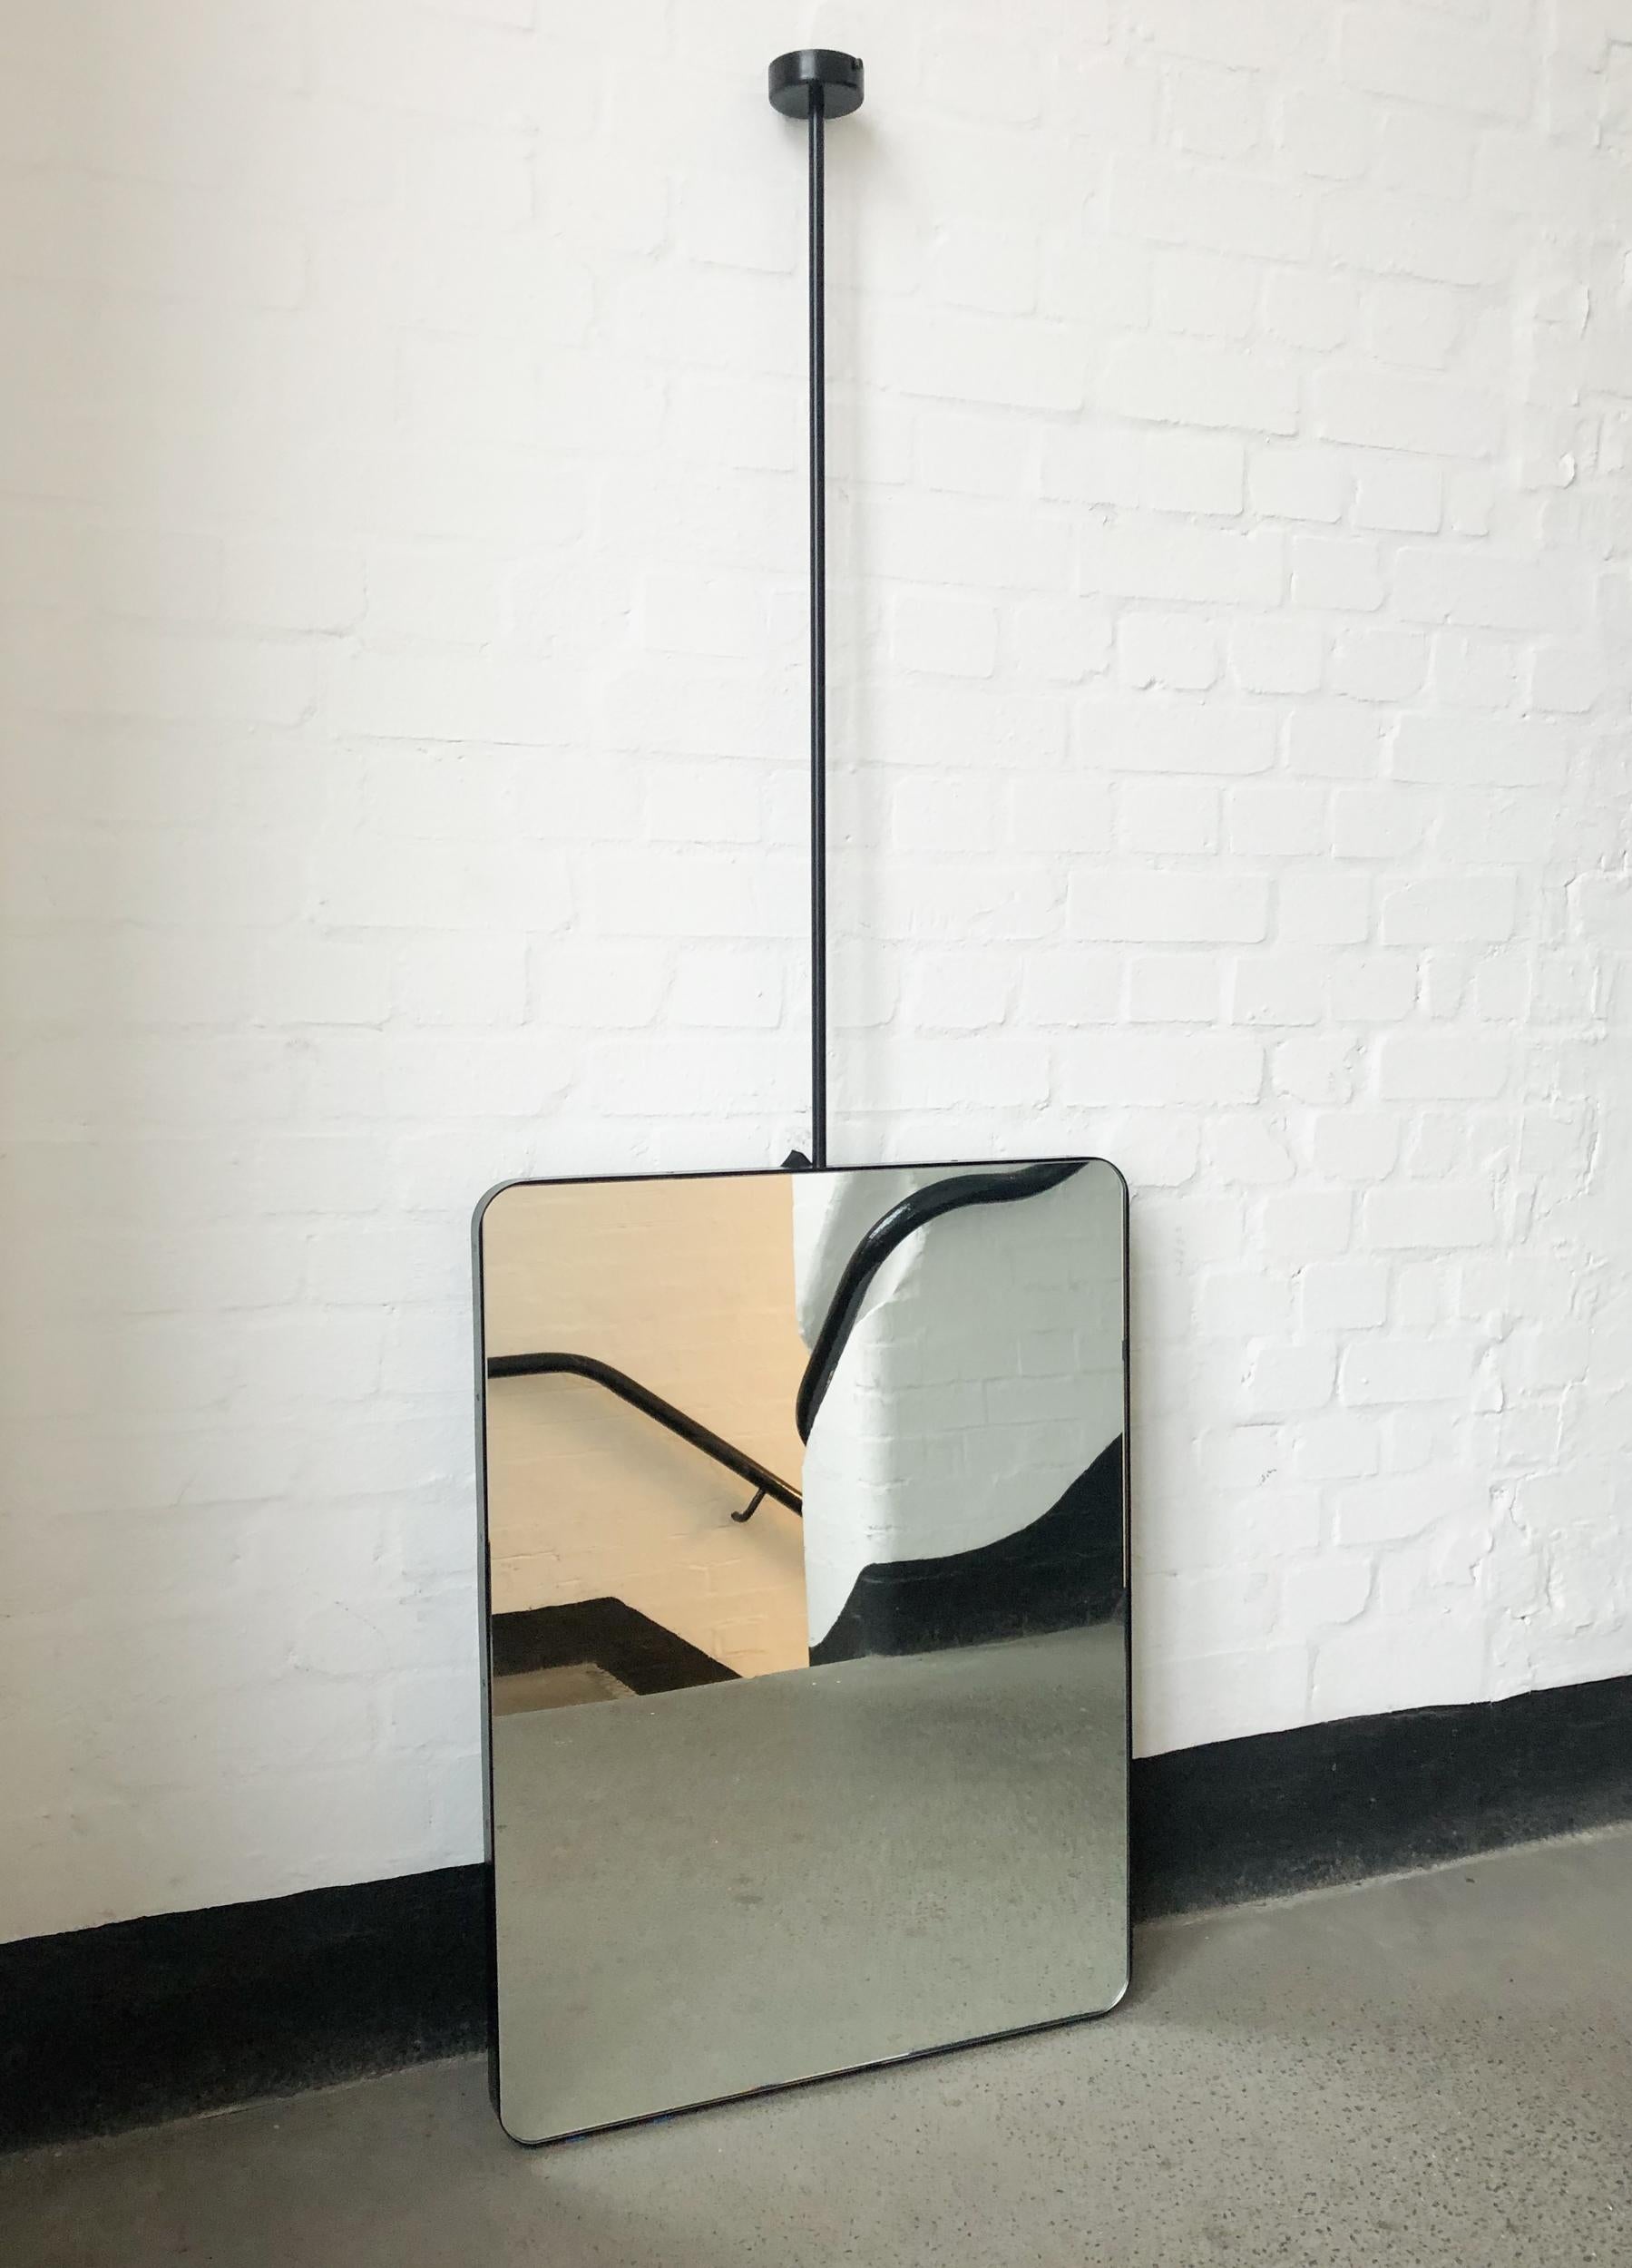 The images in this personal entry illustrate a standard size of the suspended Quadris™ mirror with a black matte frame. All specifications for this particular entry are as detailed in the presentation already provided and approved.

The price in